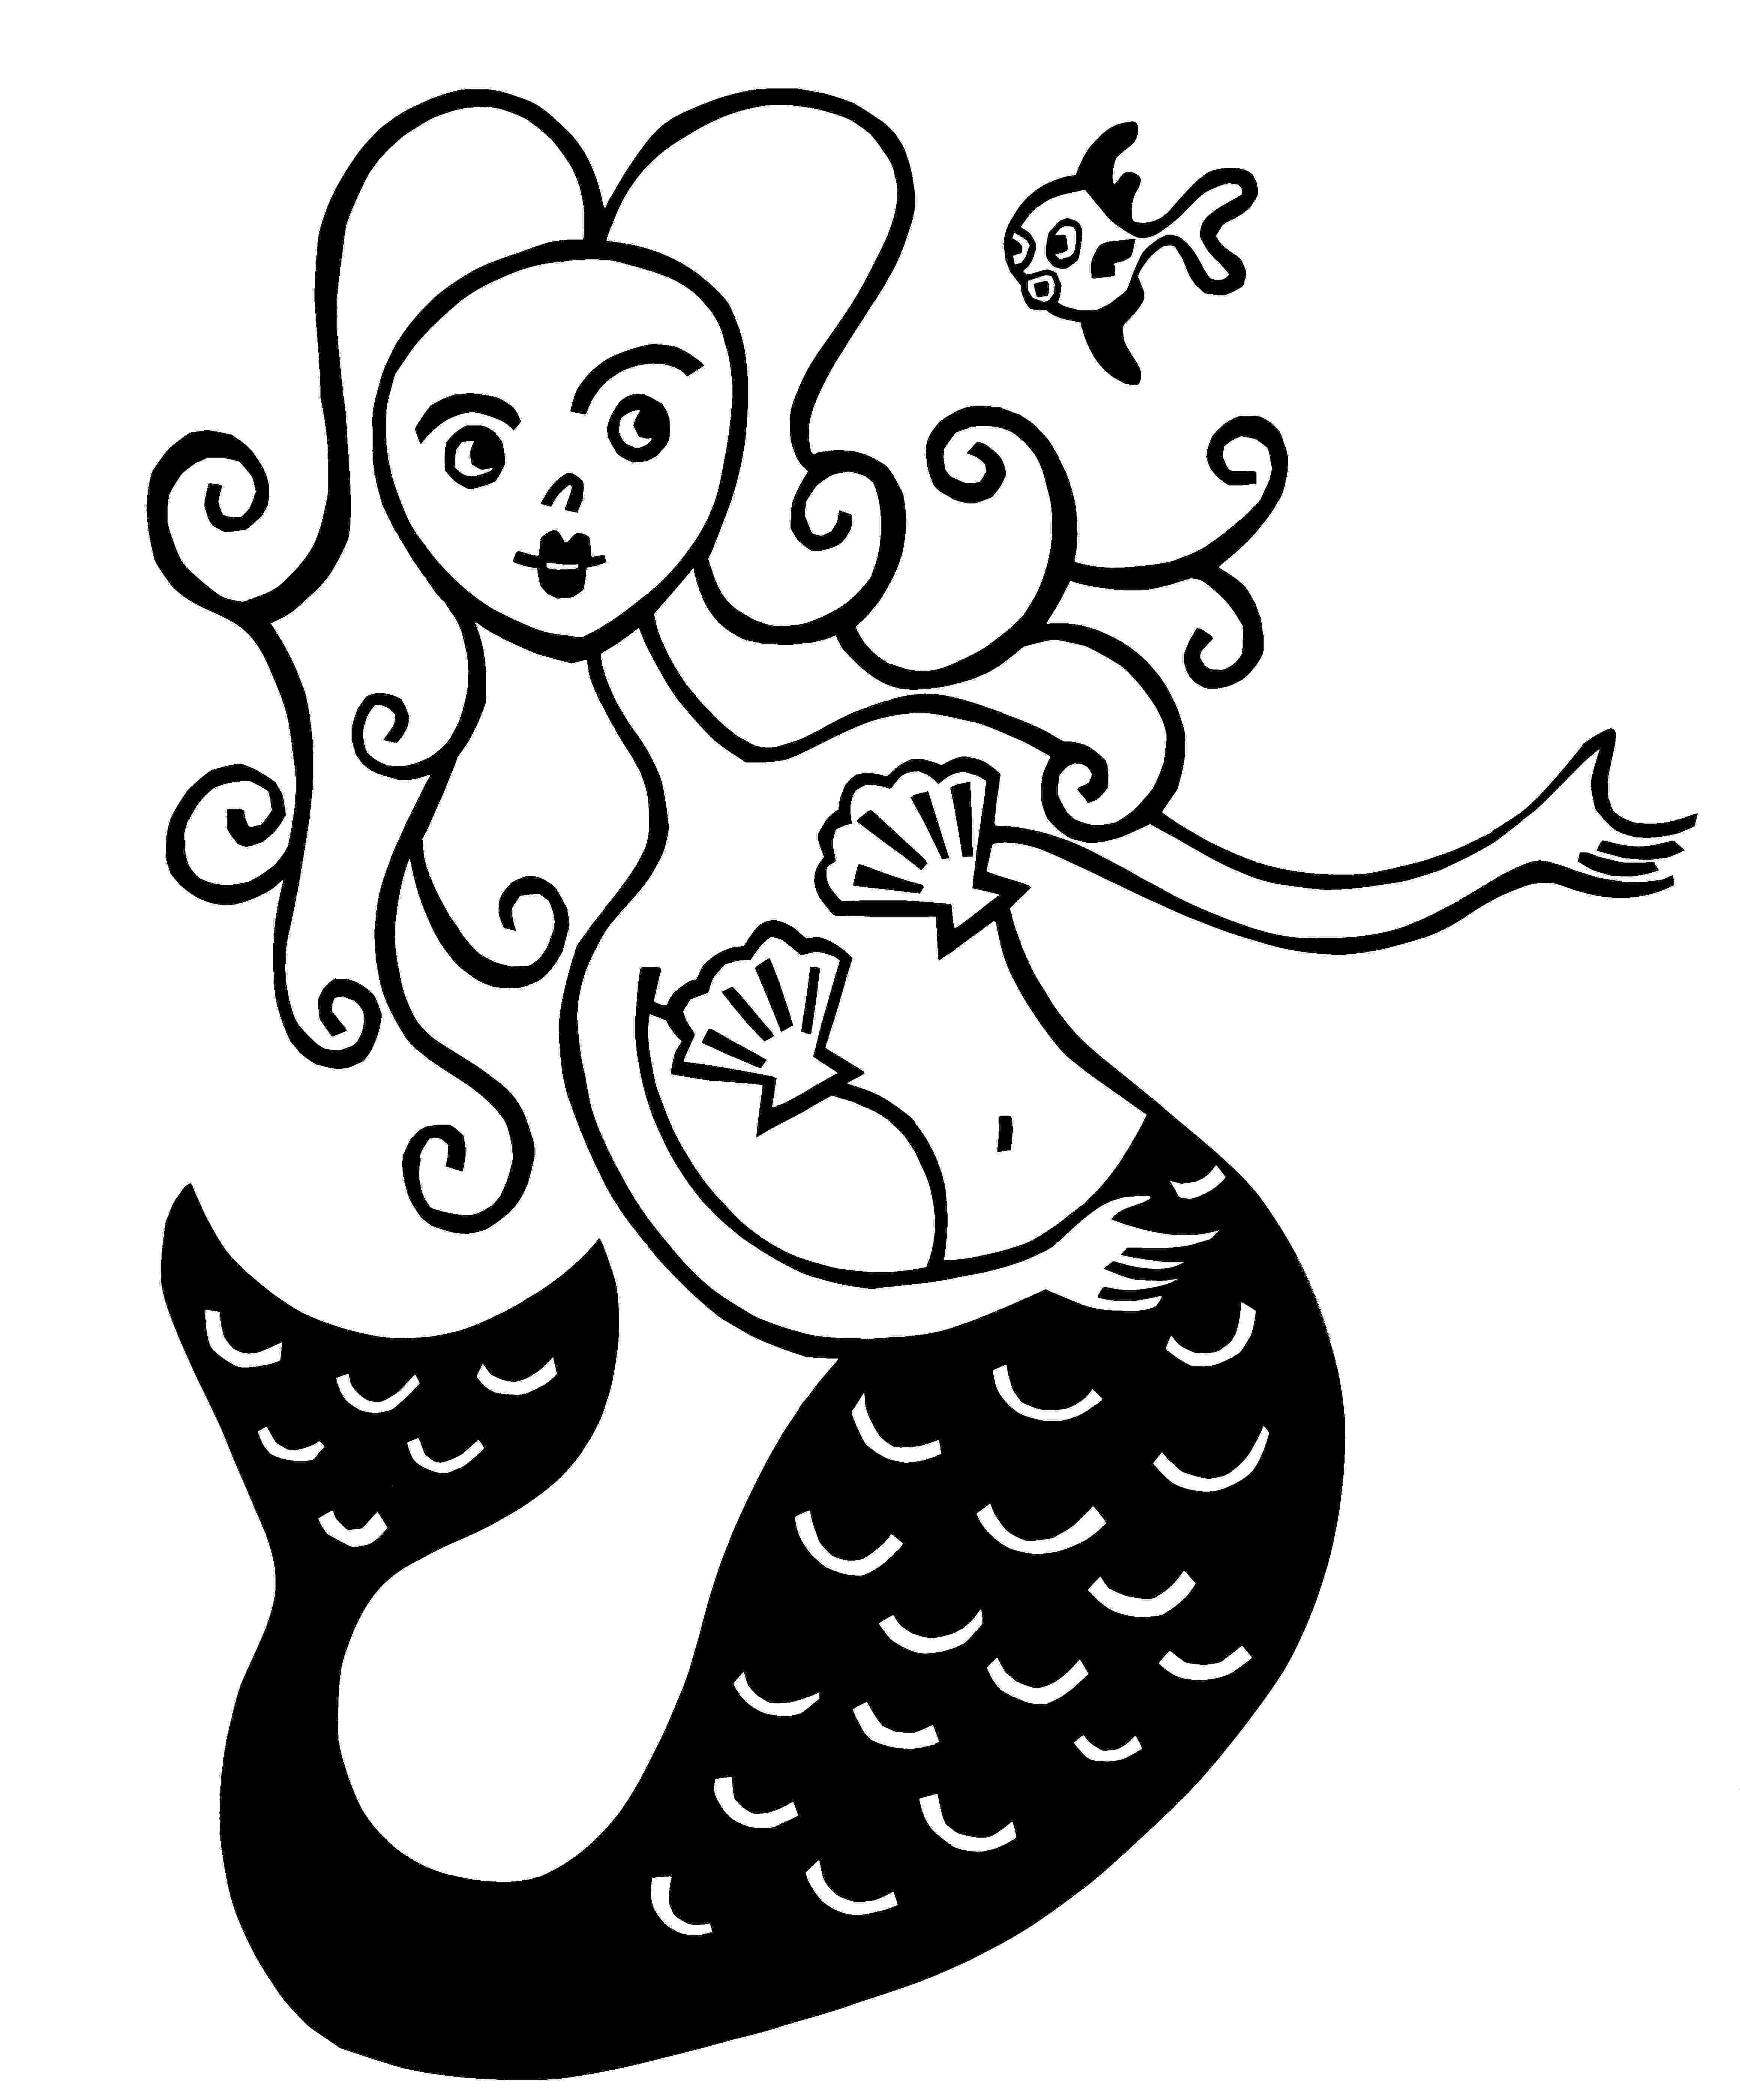 mermaids to draw buzzdome blog things that fascinate me that might draw mermaids to 